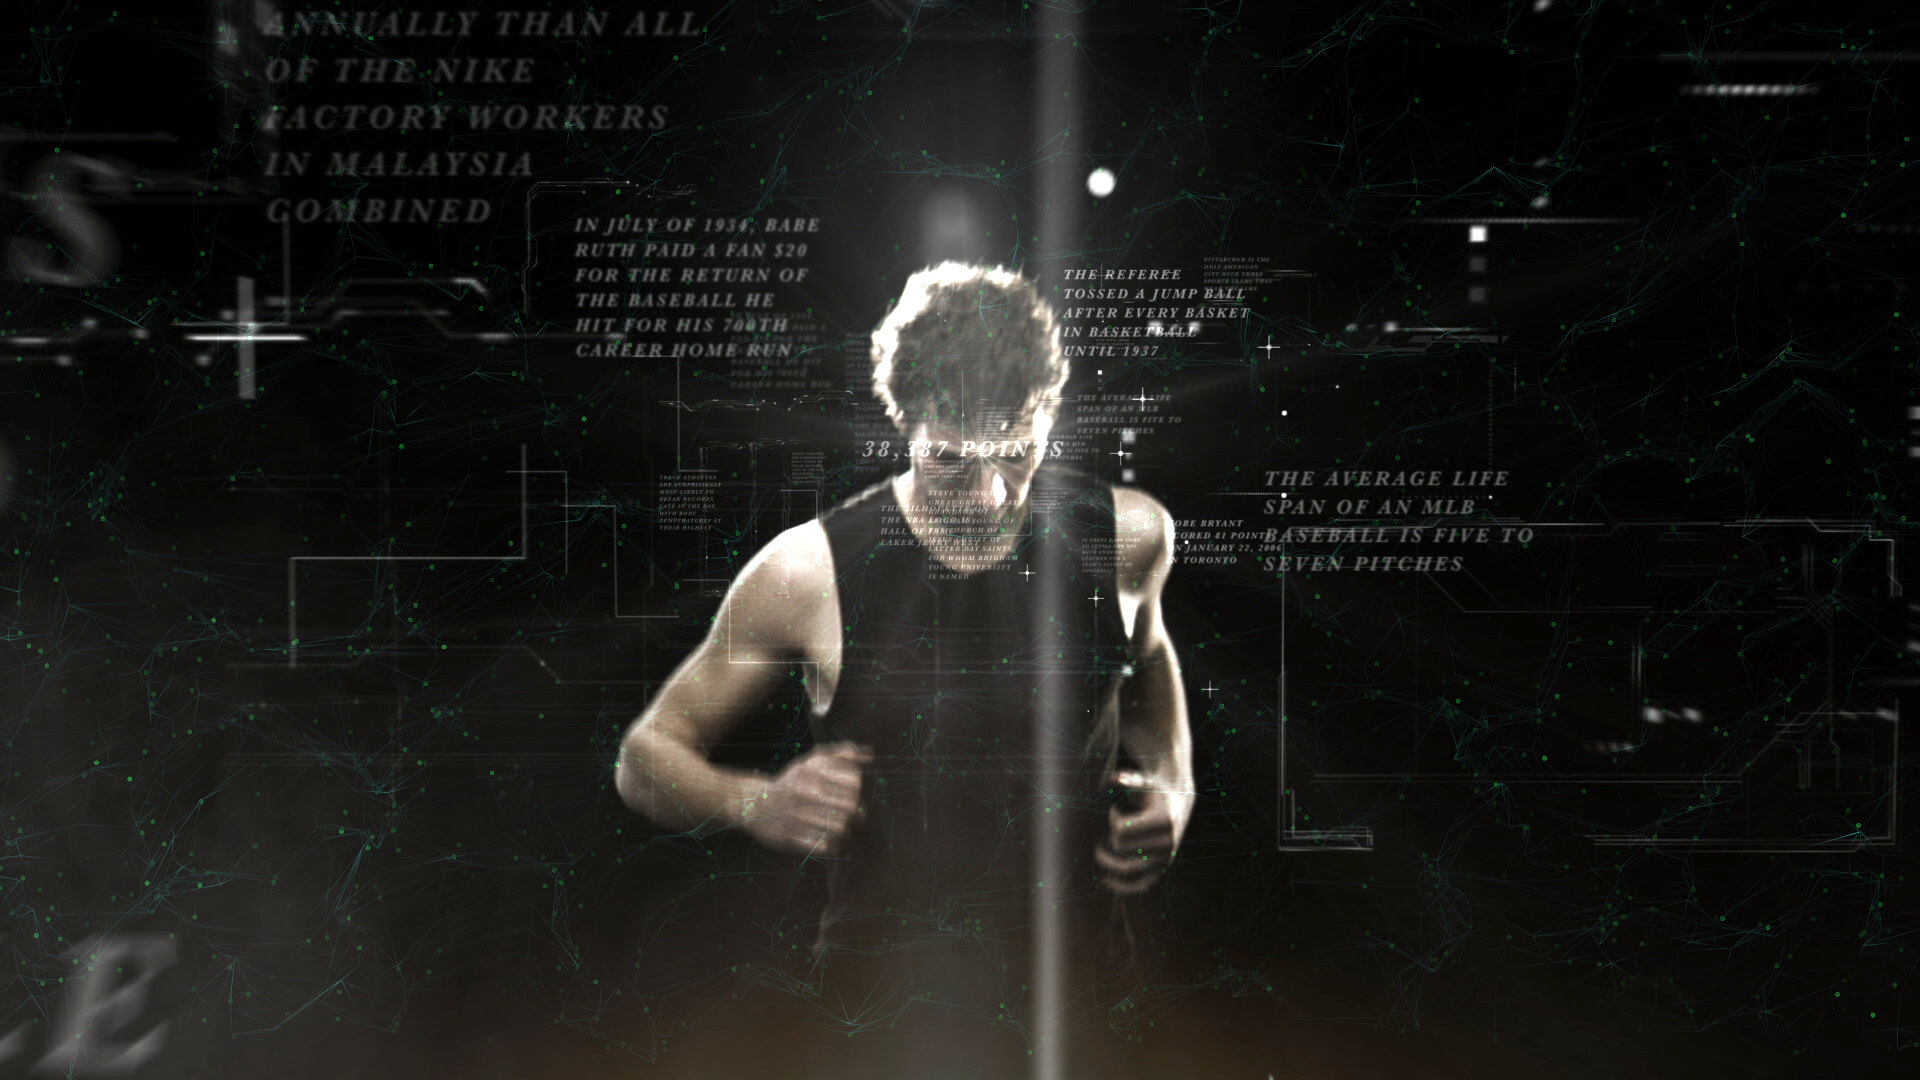 Man running in data void from Nashville, TN based Sportsblog web promo video designed and animated by Nashville's ST8MNT employing type lockups, tech graphic elements, lens flare